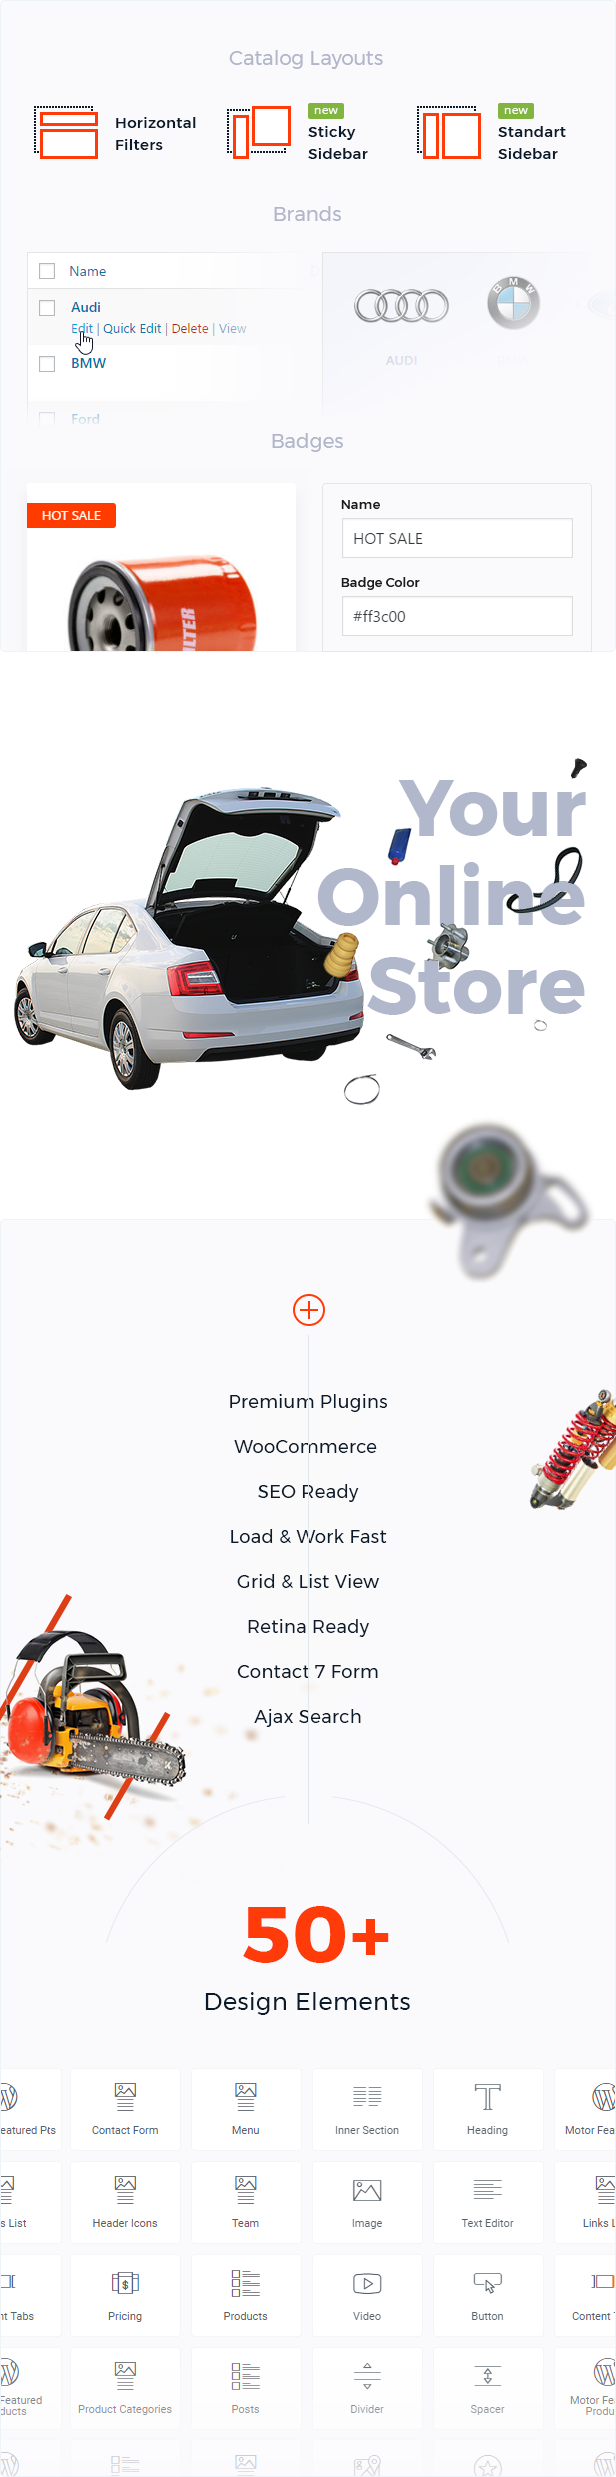 1637557852 883 5 - Motor – Cars, Parts, Service, Equipments and Accessories WooCommerce Store